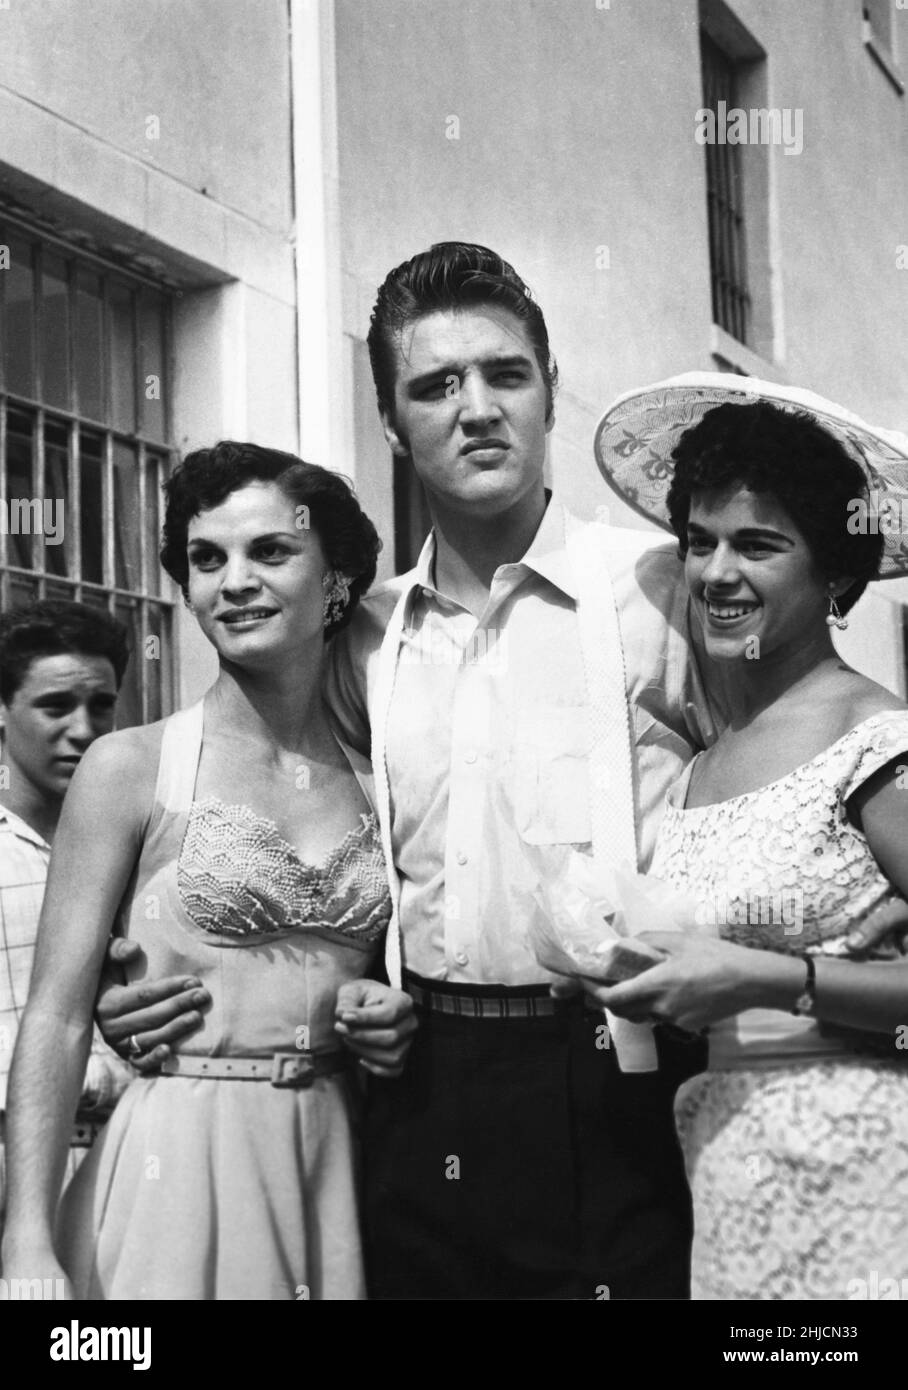 Elvis Presley (1935-1977) in Tampa, Florida, with two fans, 1956. Stock Photo